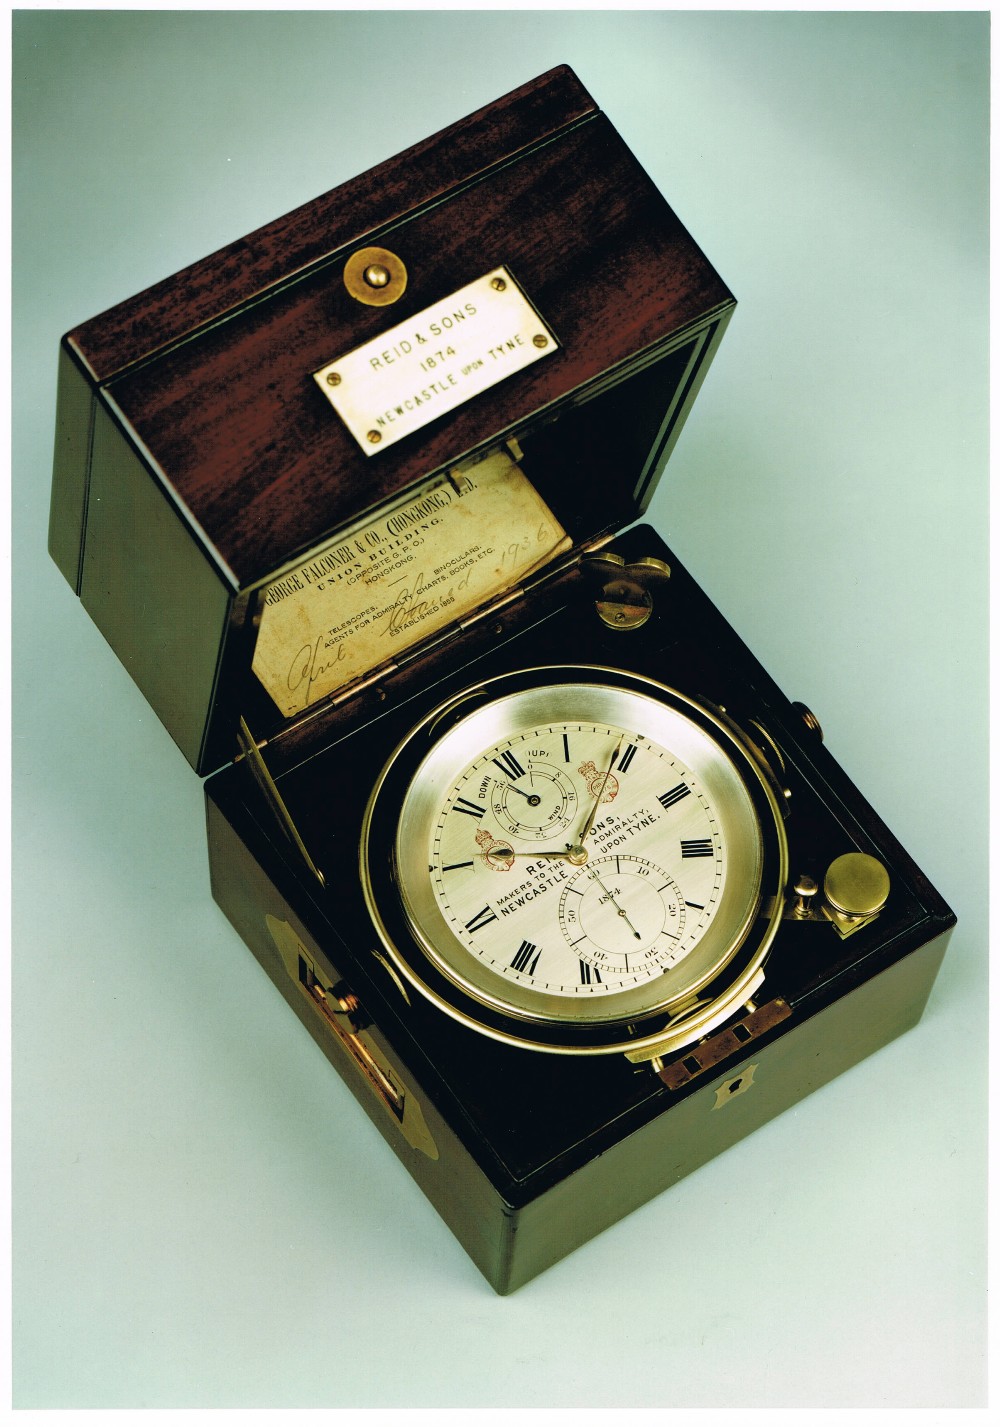 A 2-DAY MARINE CHRONOMETER BY REID AND SONS, ENGLAND, 1875. W: 7.00 cm (3 inches) H: 7.50 cm (3